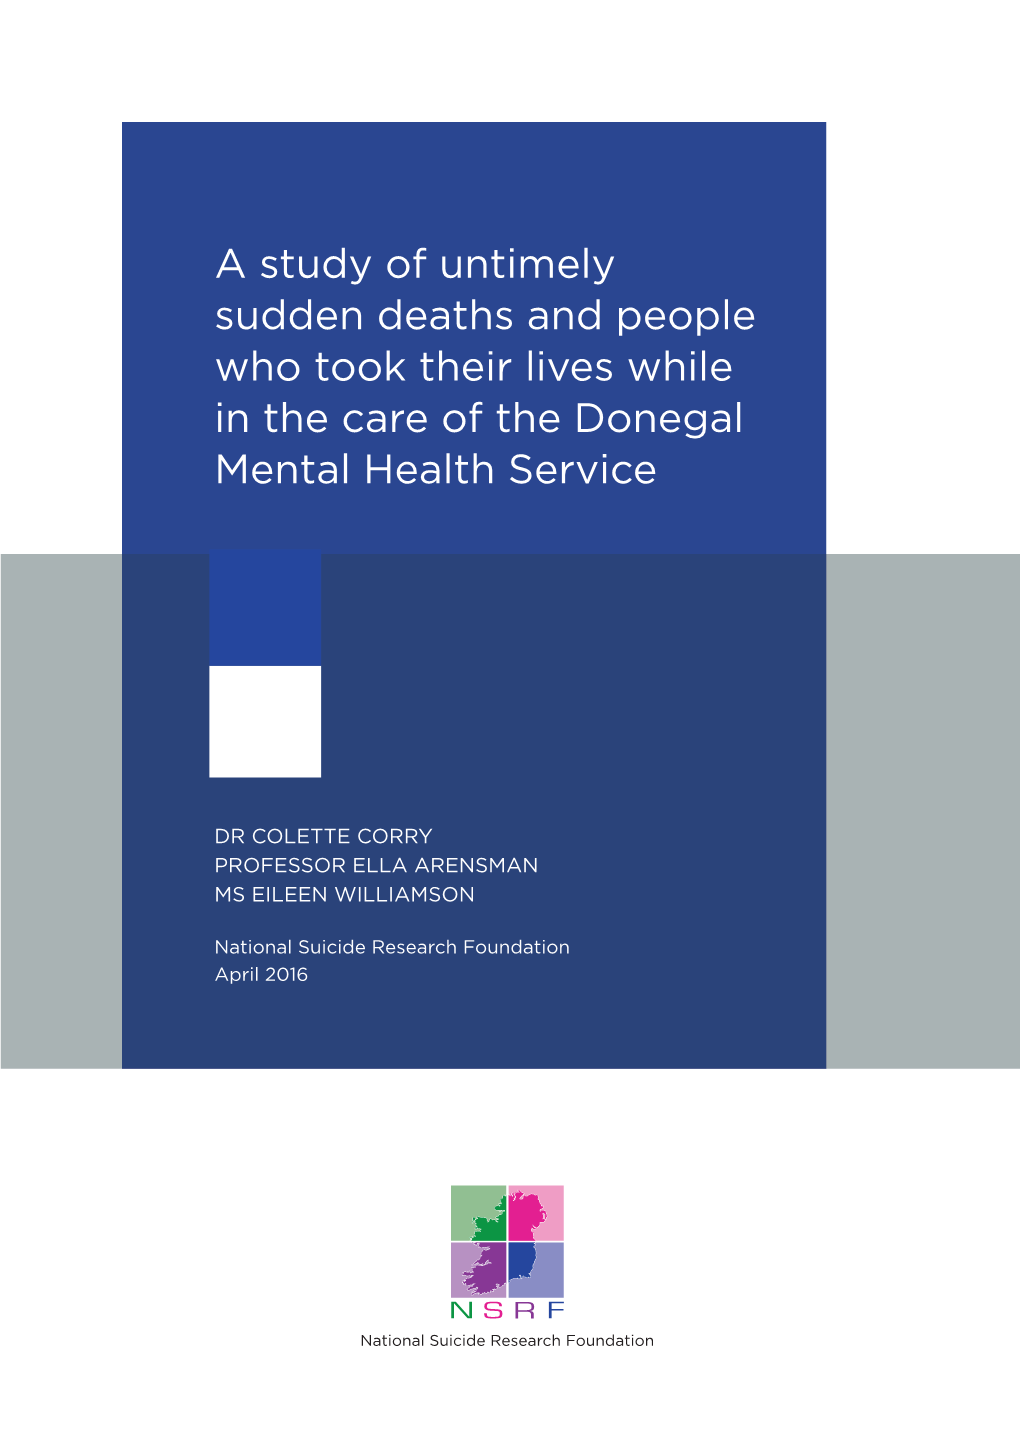 A Study of Untimely Sudden Deaths and People Who Took Their Lives While in the Care of the Donegal Mental Health Service